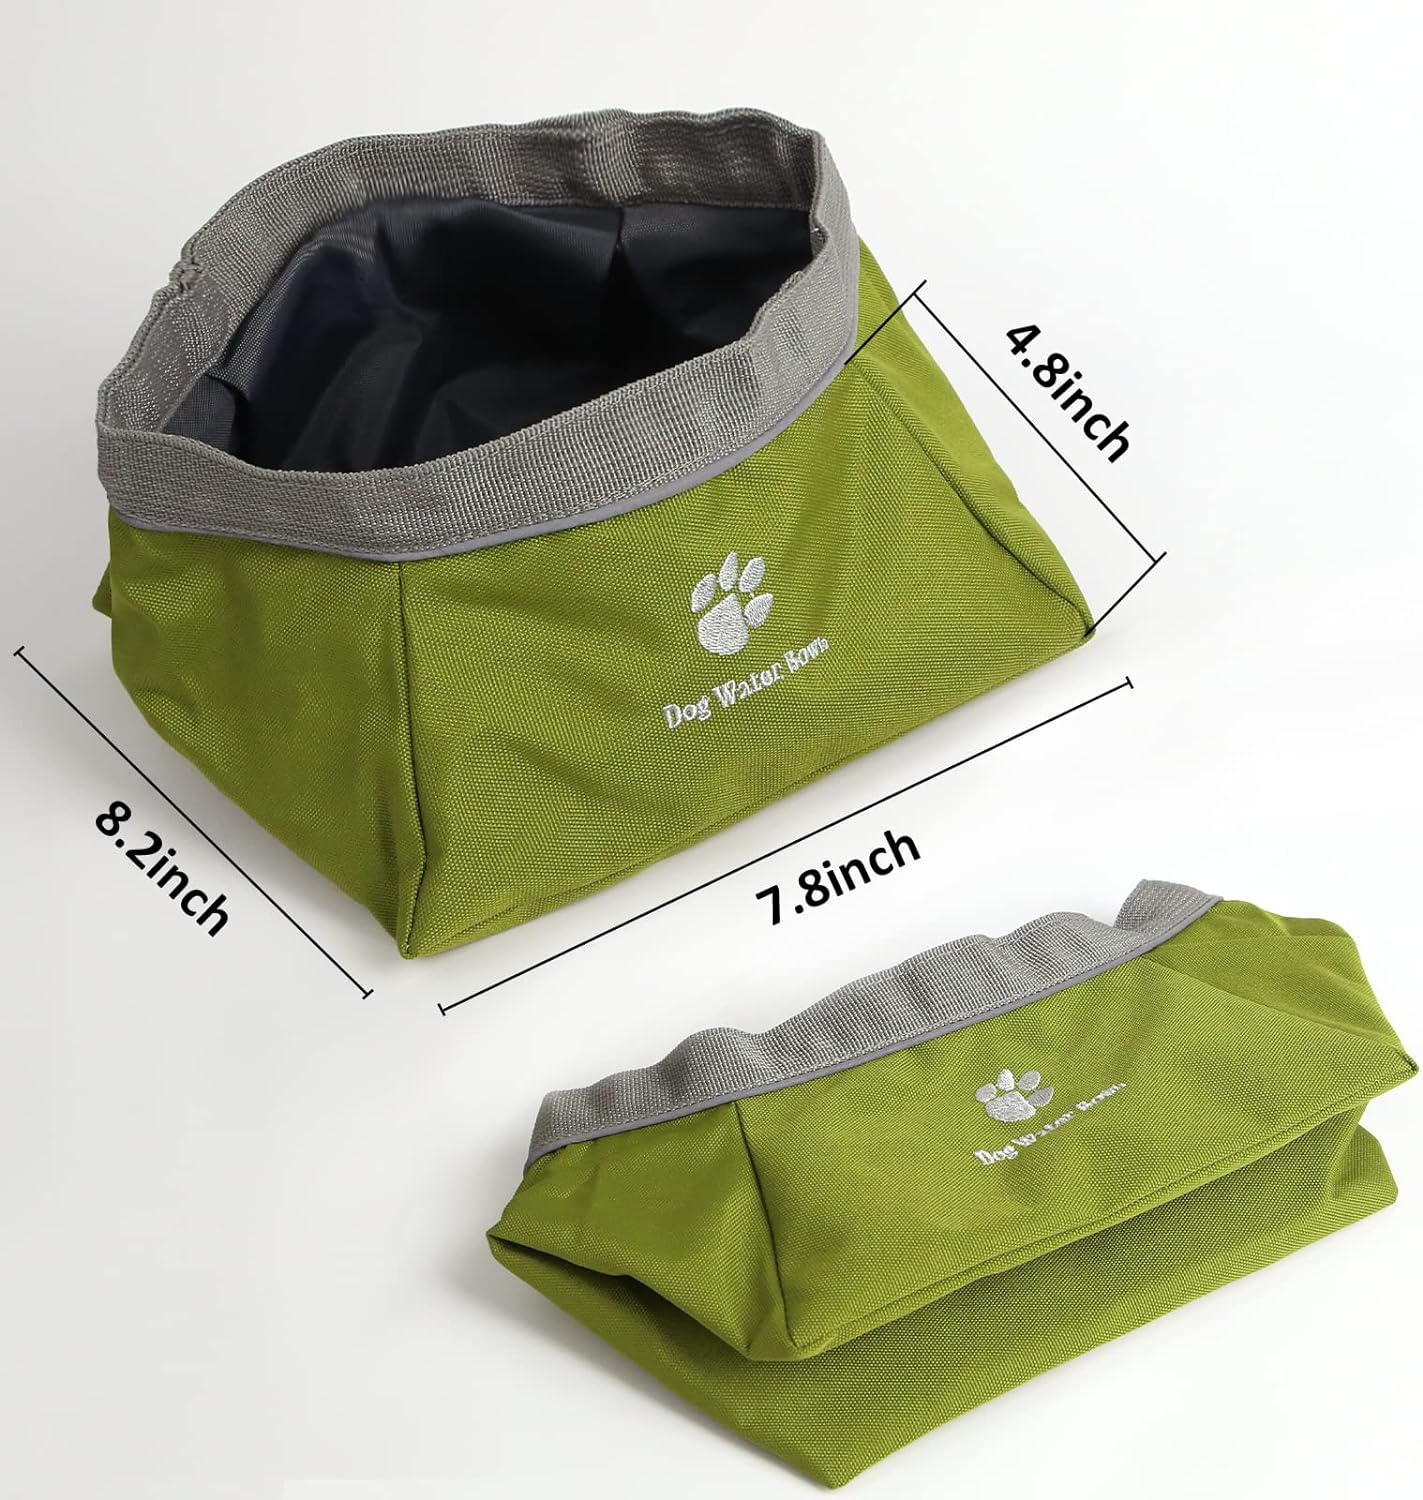 48 oz Portable Foldable Travel Pet Water Bowl and Food Bowls